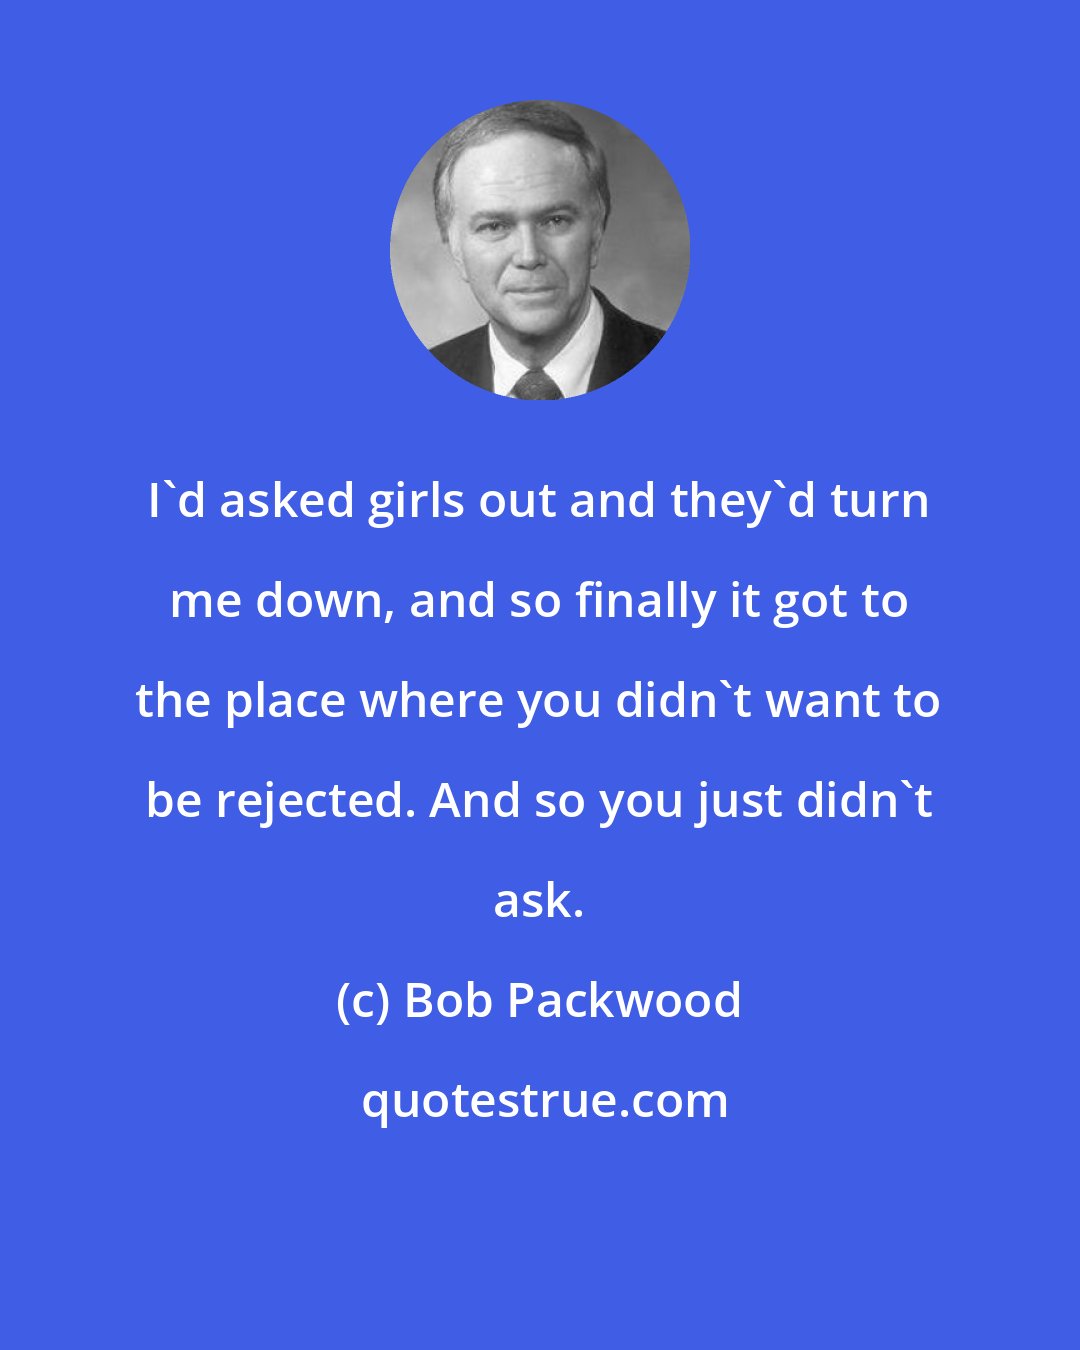 Bob Packwood: I'd asked girls out and they'd turn me down, and so finally it got to the place where you didn't want to be rejected. And so you just didn't ask.